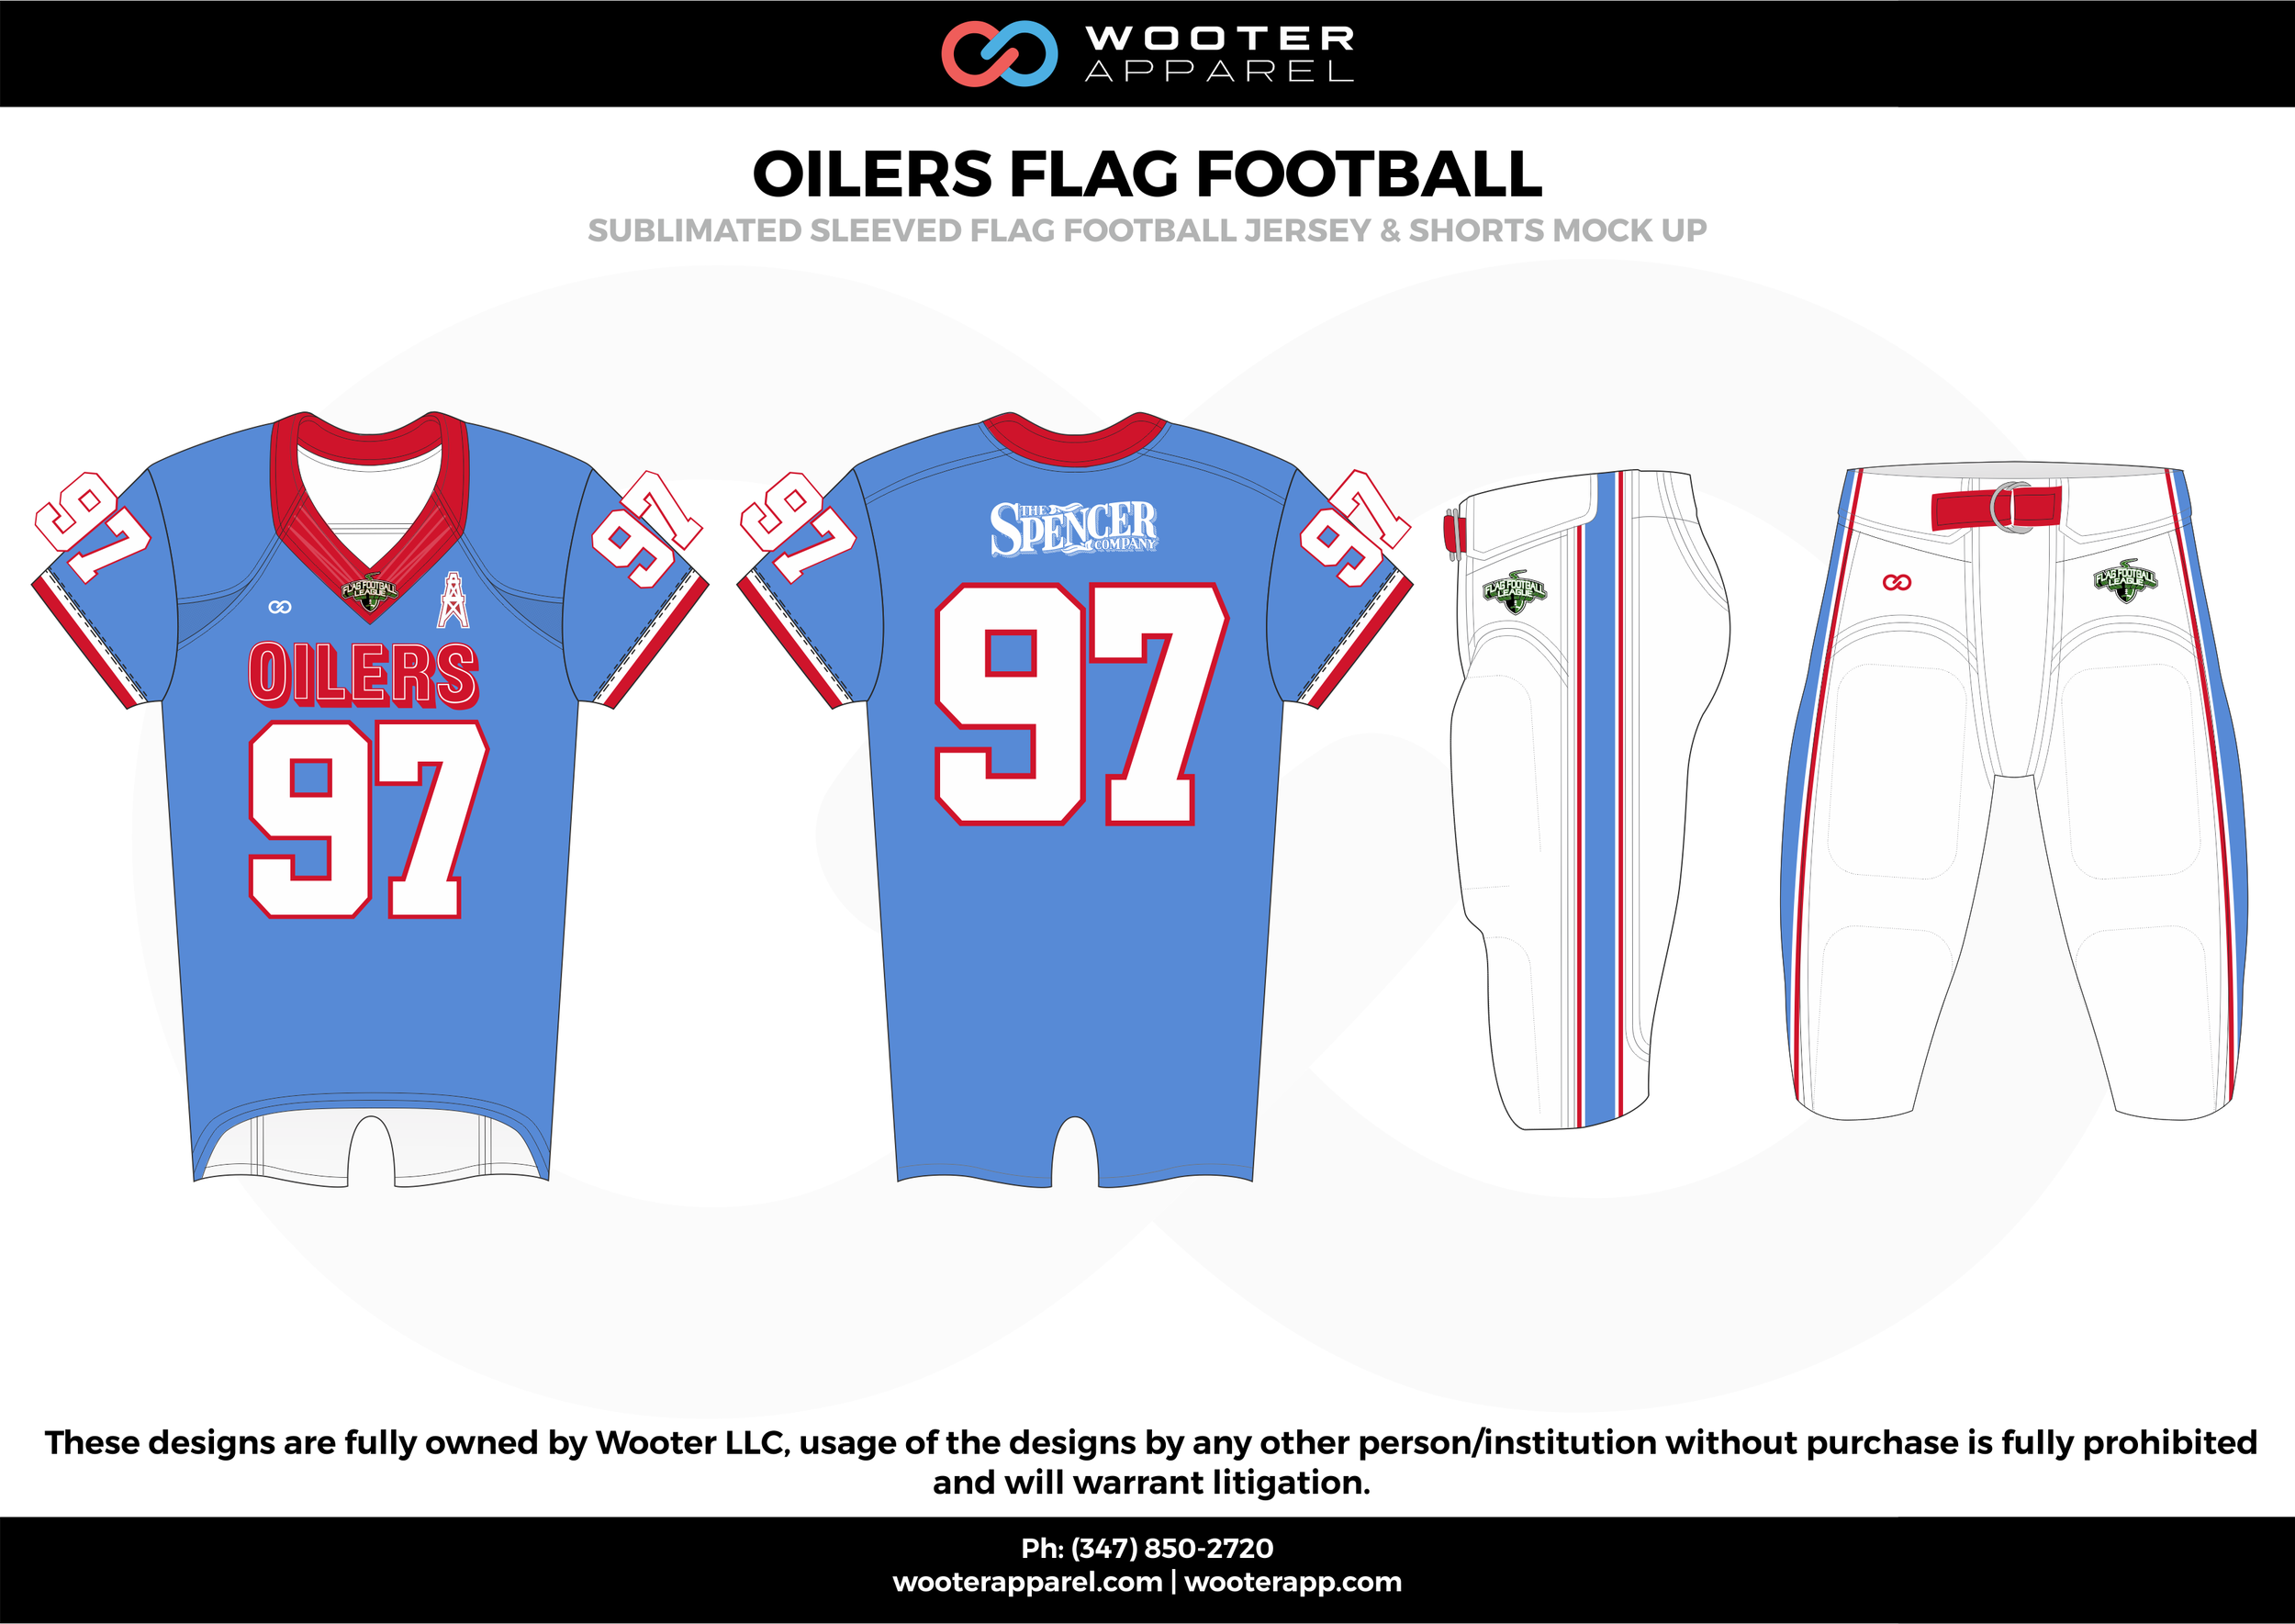 red and blue football jersey